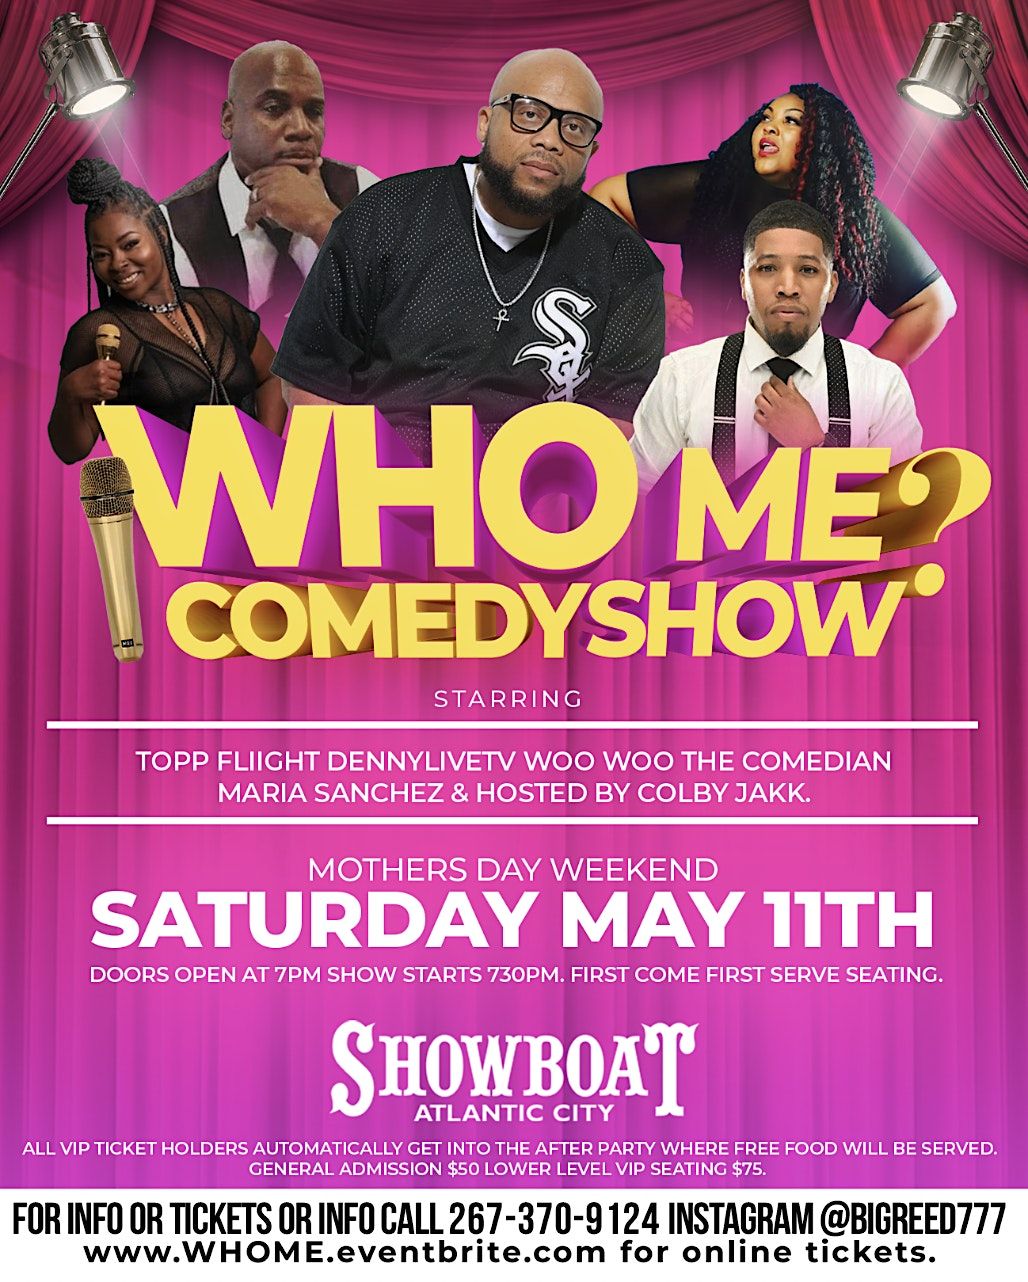 WHO ME? THE COMEDY SHOW